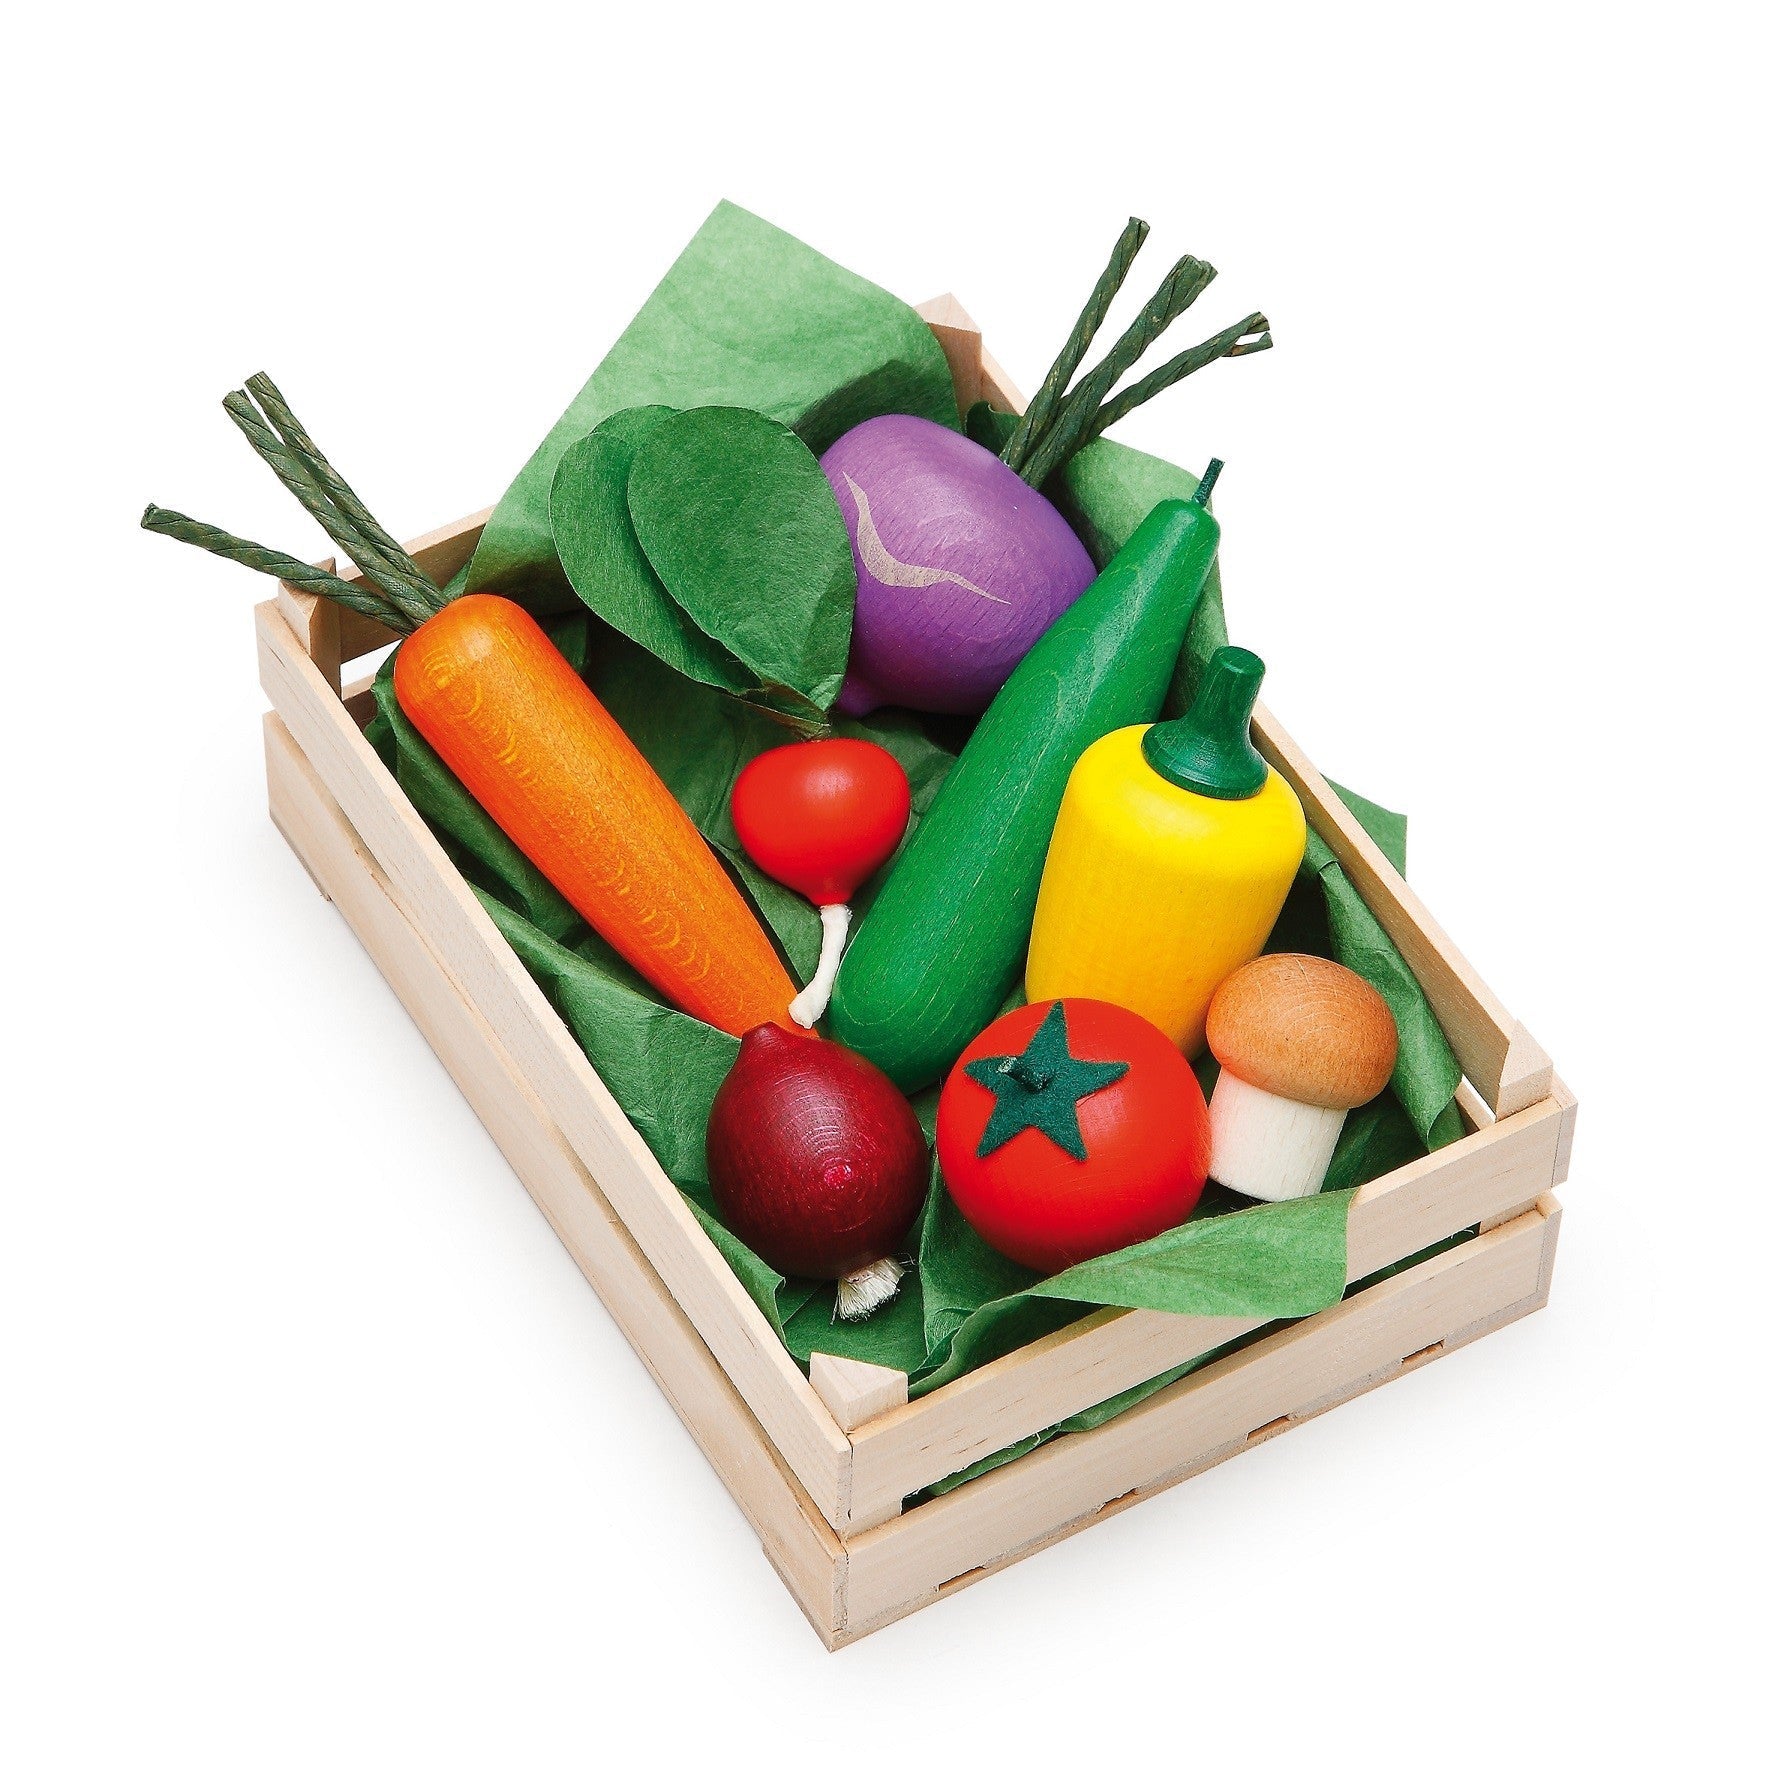 Erzi Assorted Vegetables in Crate - Wooden Play Food